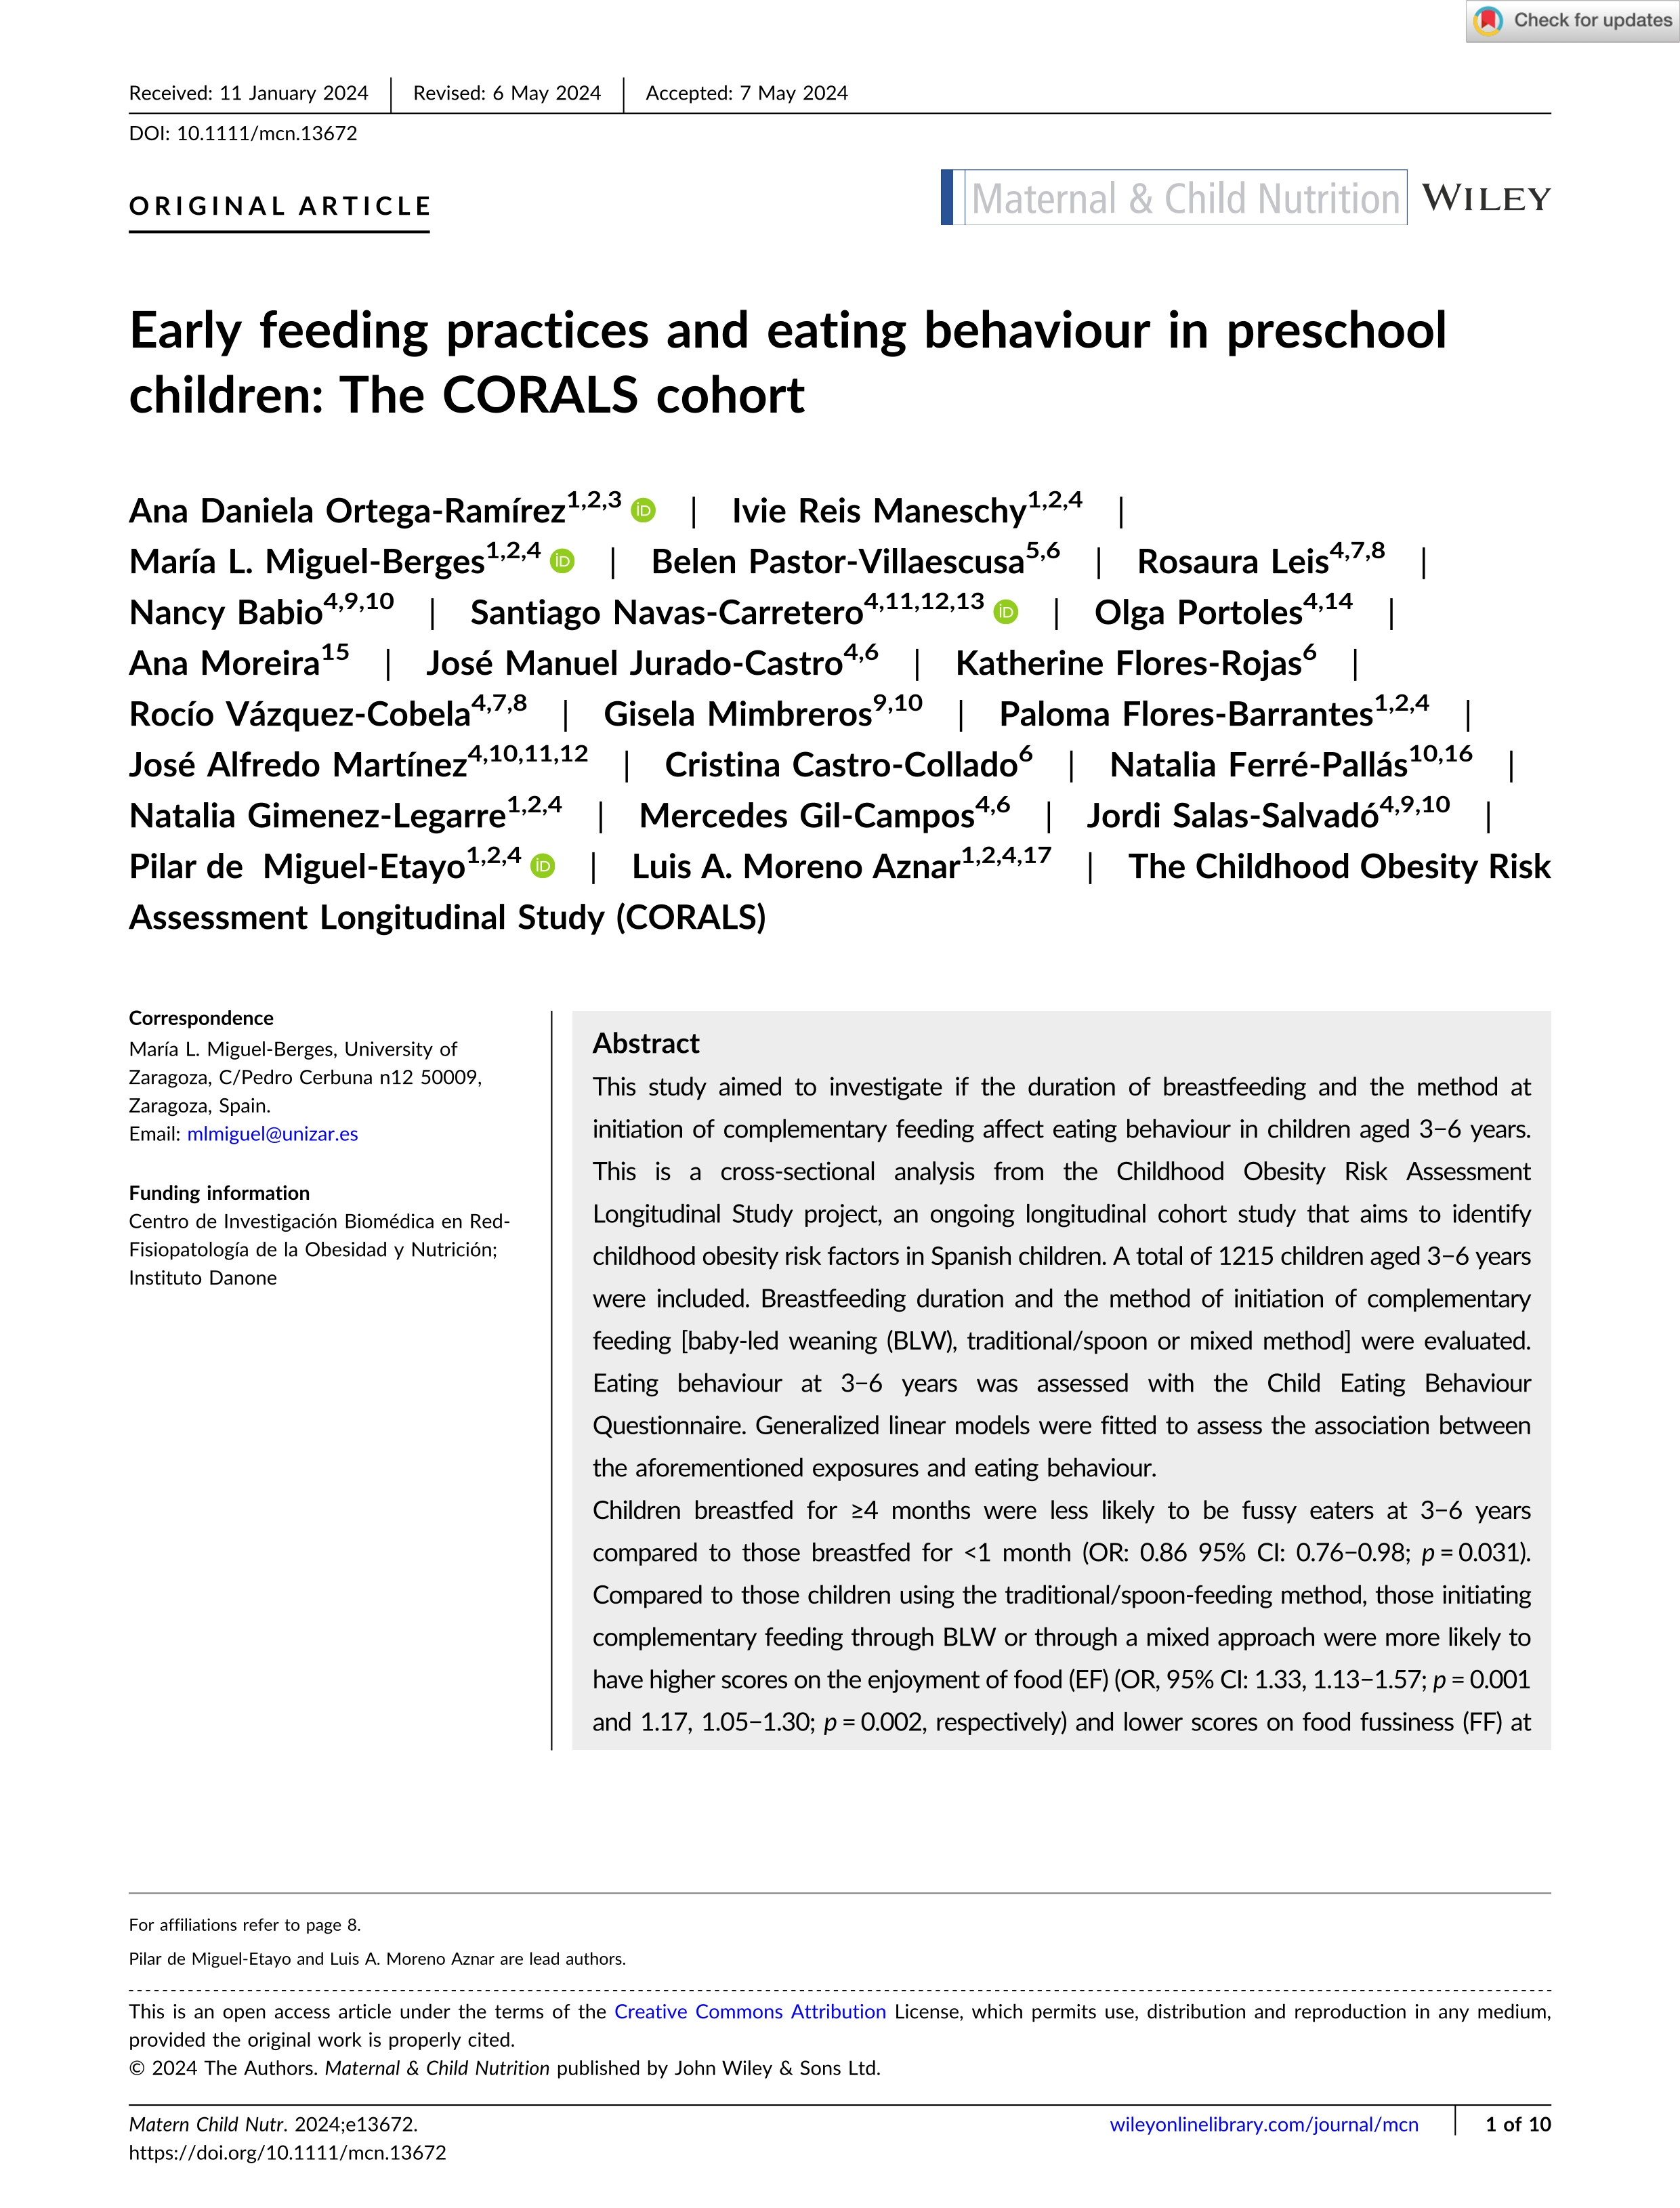 Early feeding practices and eating behaviour in preschool children: The CORALS cohort